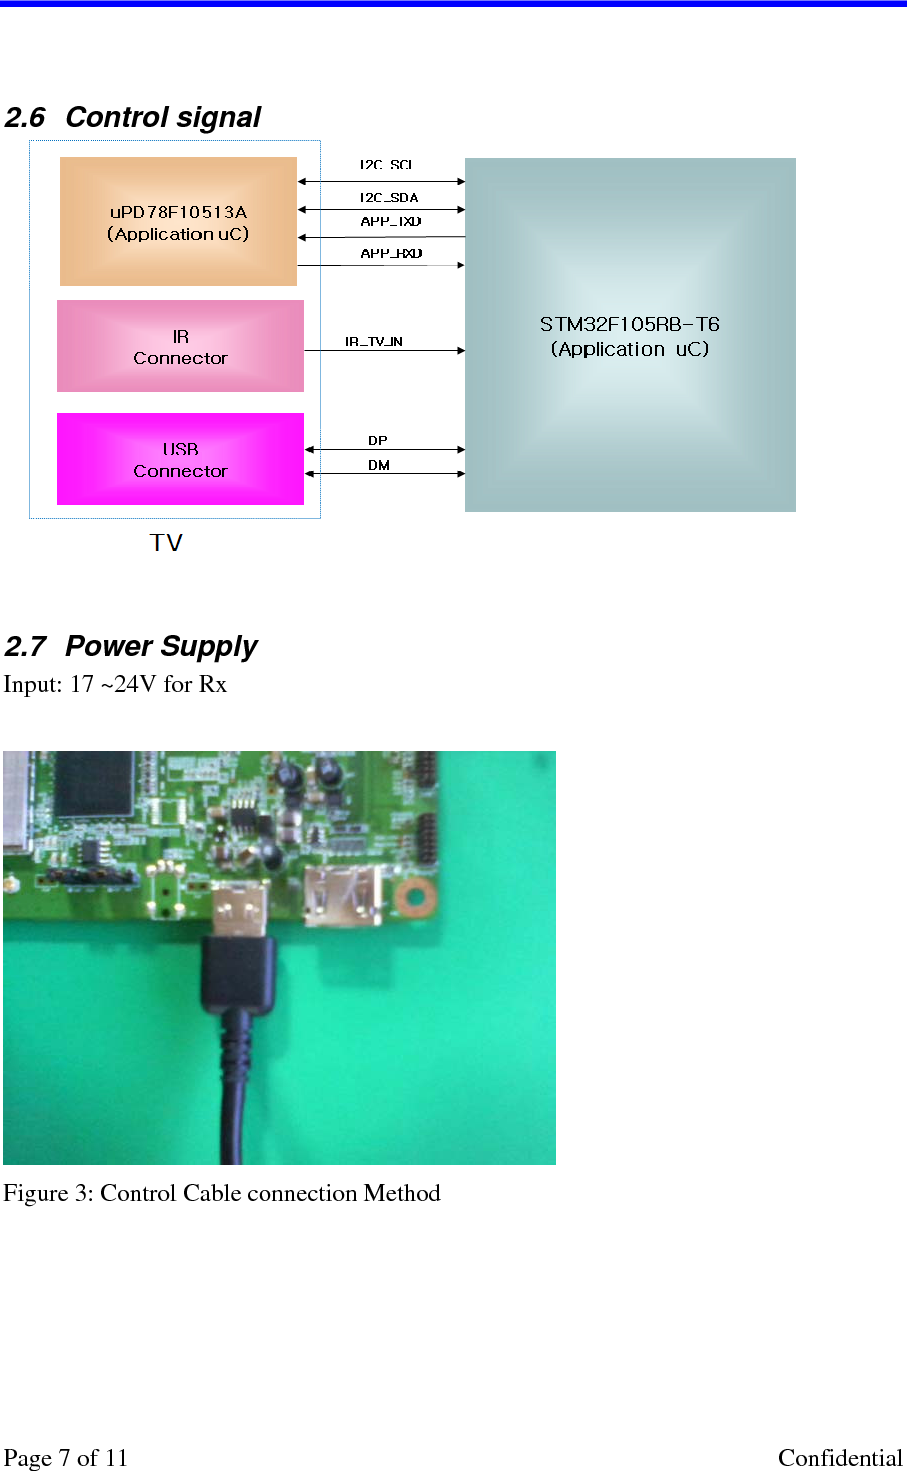     2.6  Control signal    2.7  Power Supply Input: 17 ~24V for Rx   Figure 3: Control Cable connection Method Page 7 of 11    Confidential 